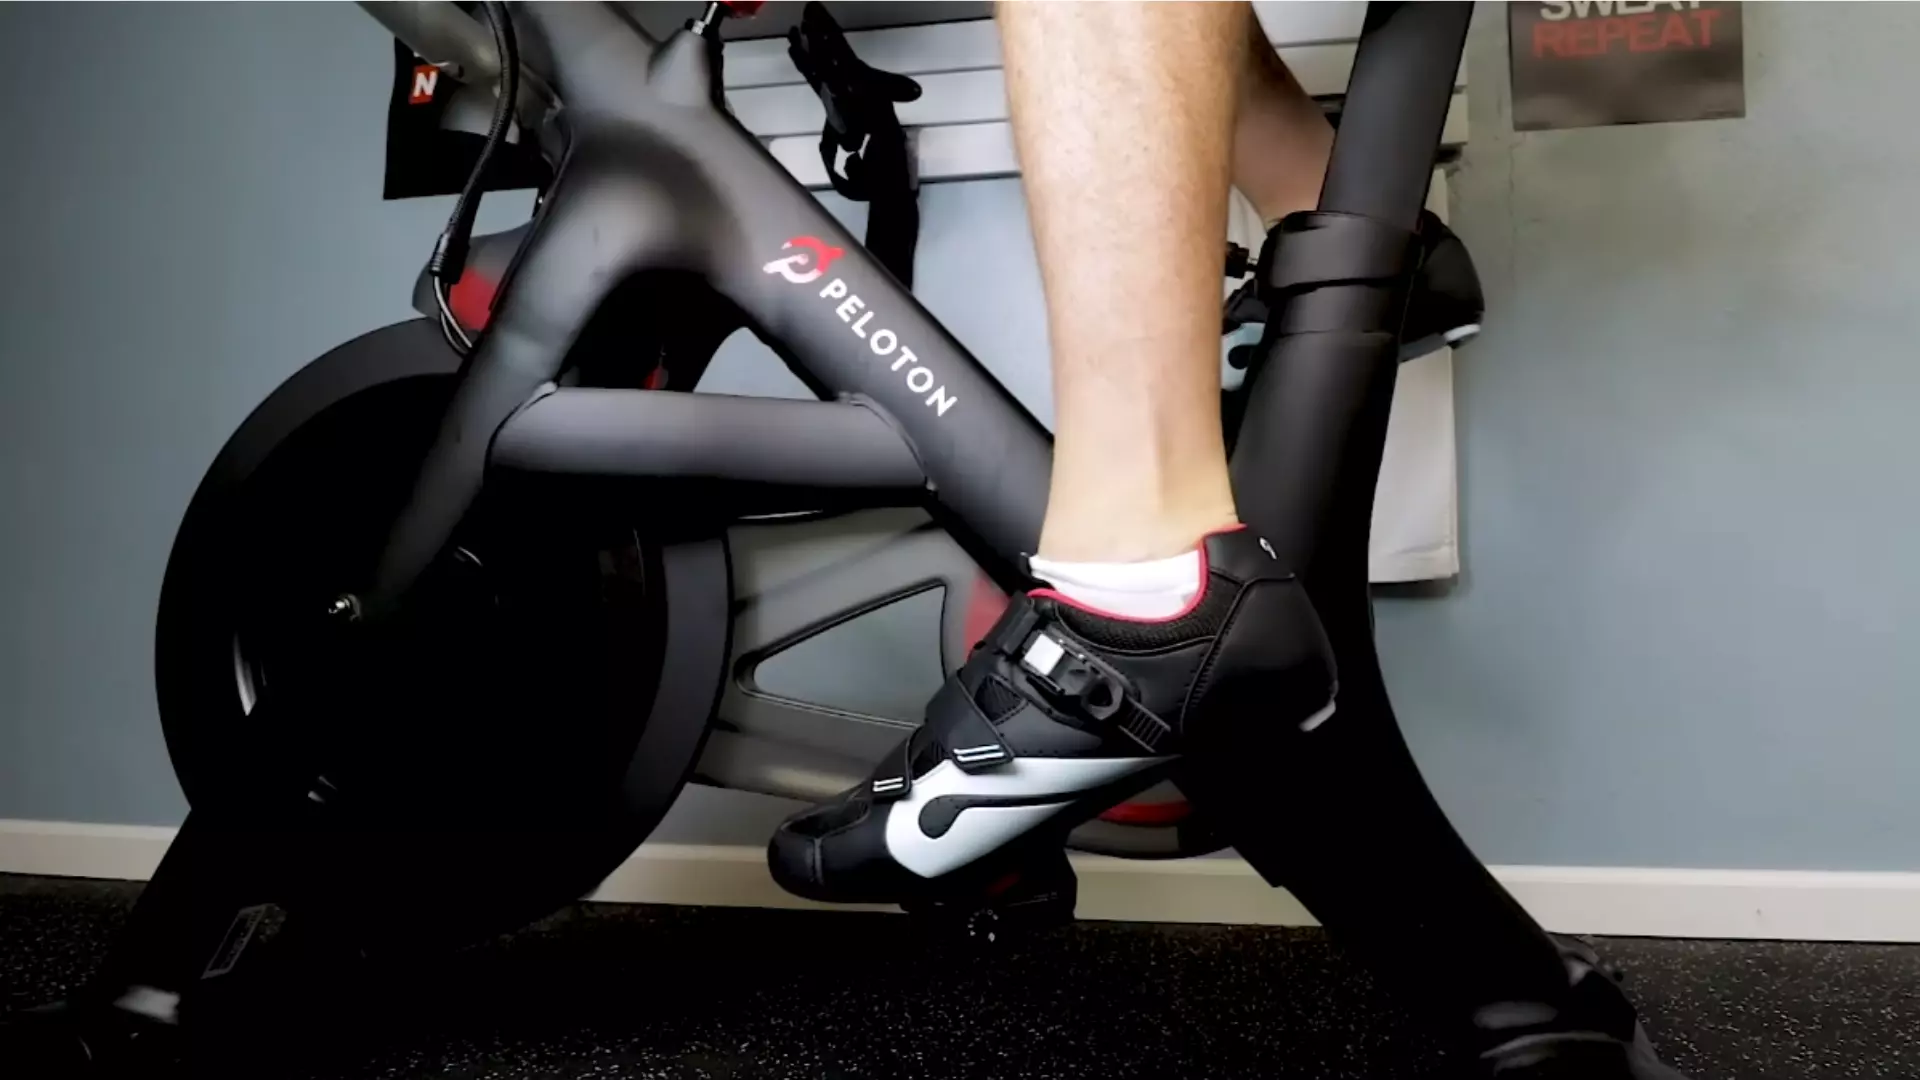 ESSENTIAL FACTORS TO CONSIDER WHILE CHOOSING A PELOTON SHOES